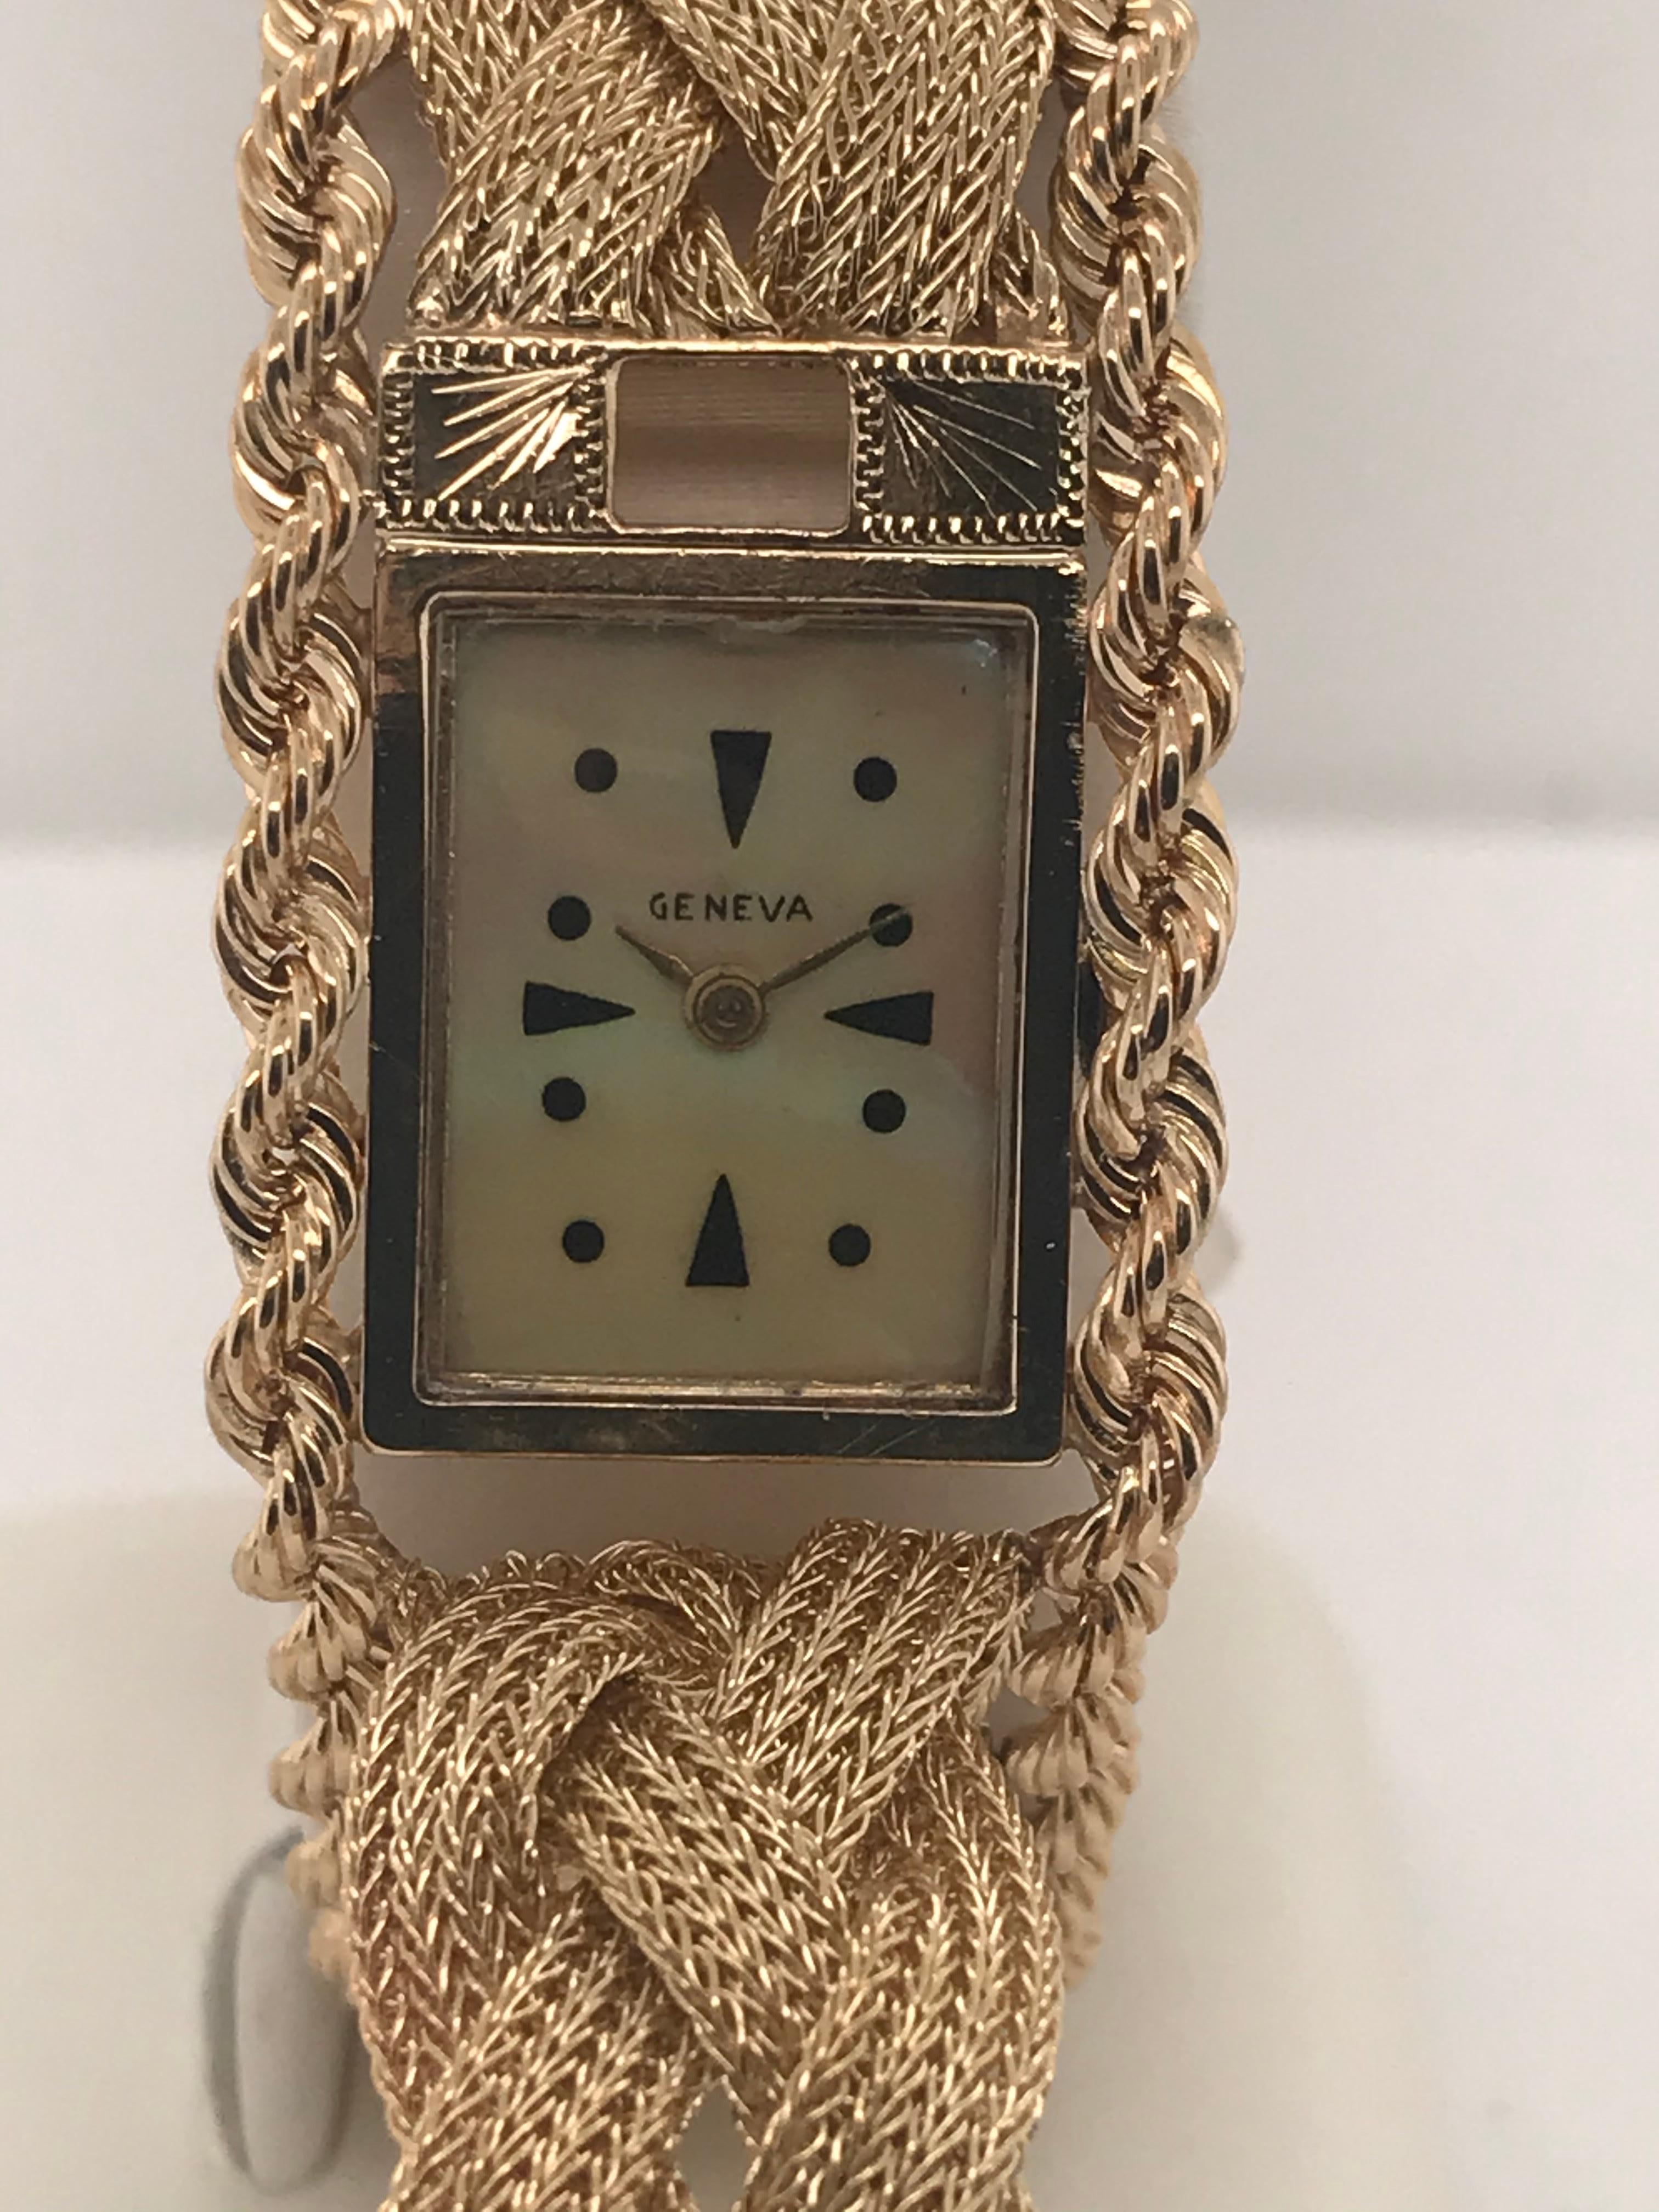 Ladies 14 karat yellow gold cover watch by Geneva.  This one of a kind  watch has 7 single cut diamonds and  7 round bright green chalcedony stones.  It has mother of pearl dial, safety chain for security, and a braided rope chain style bracelet. 